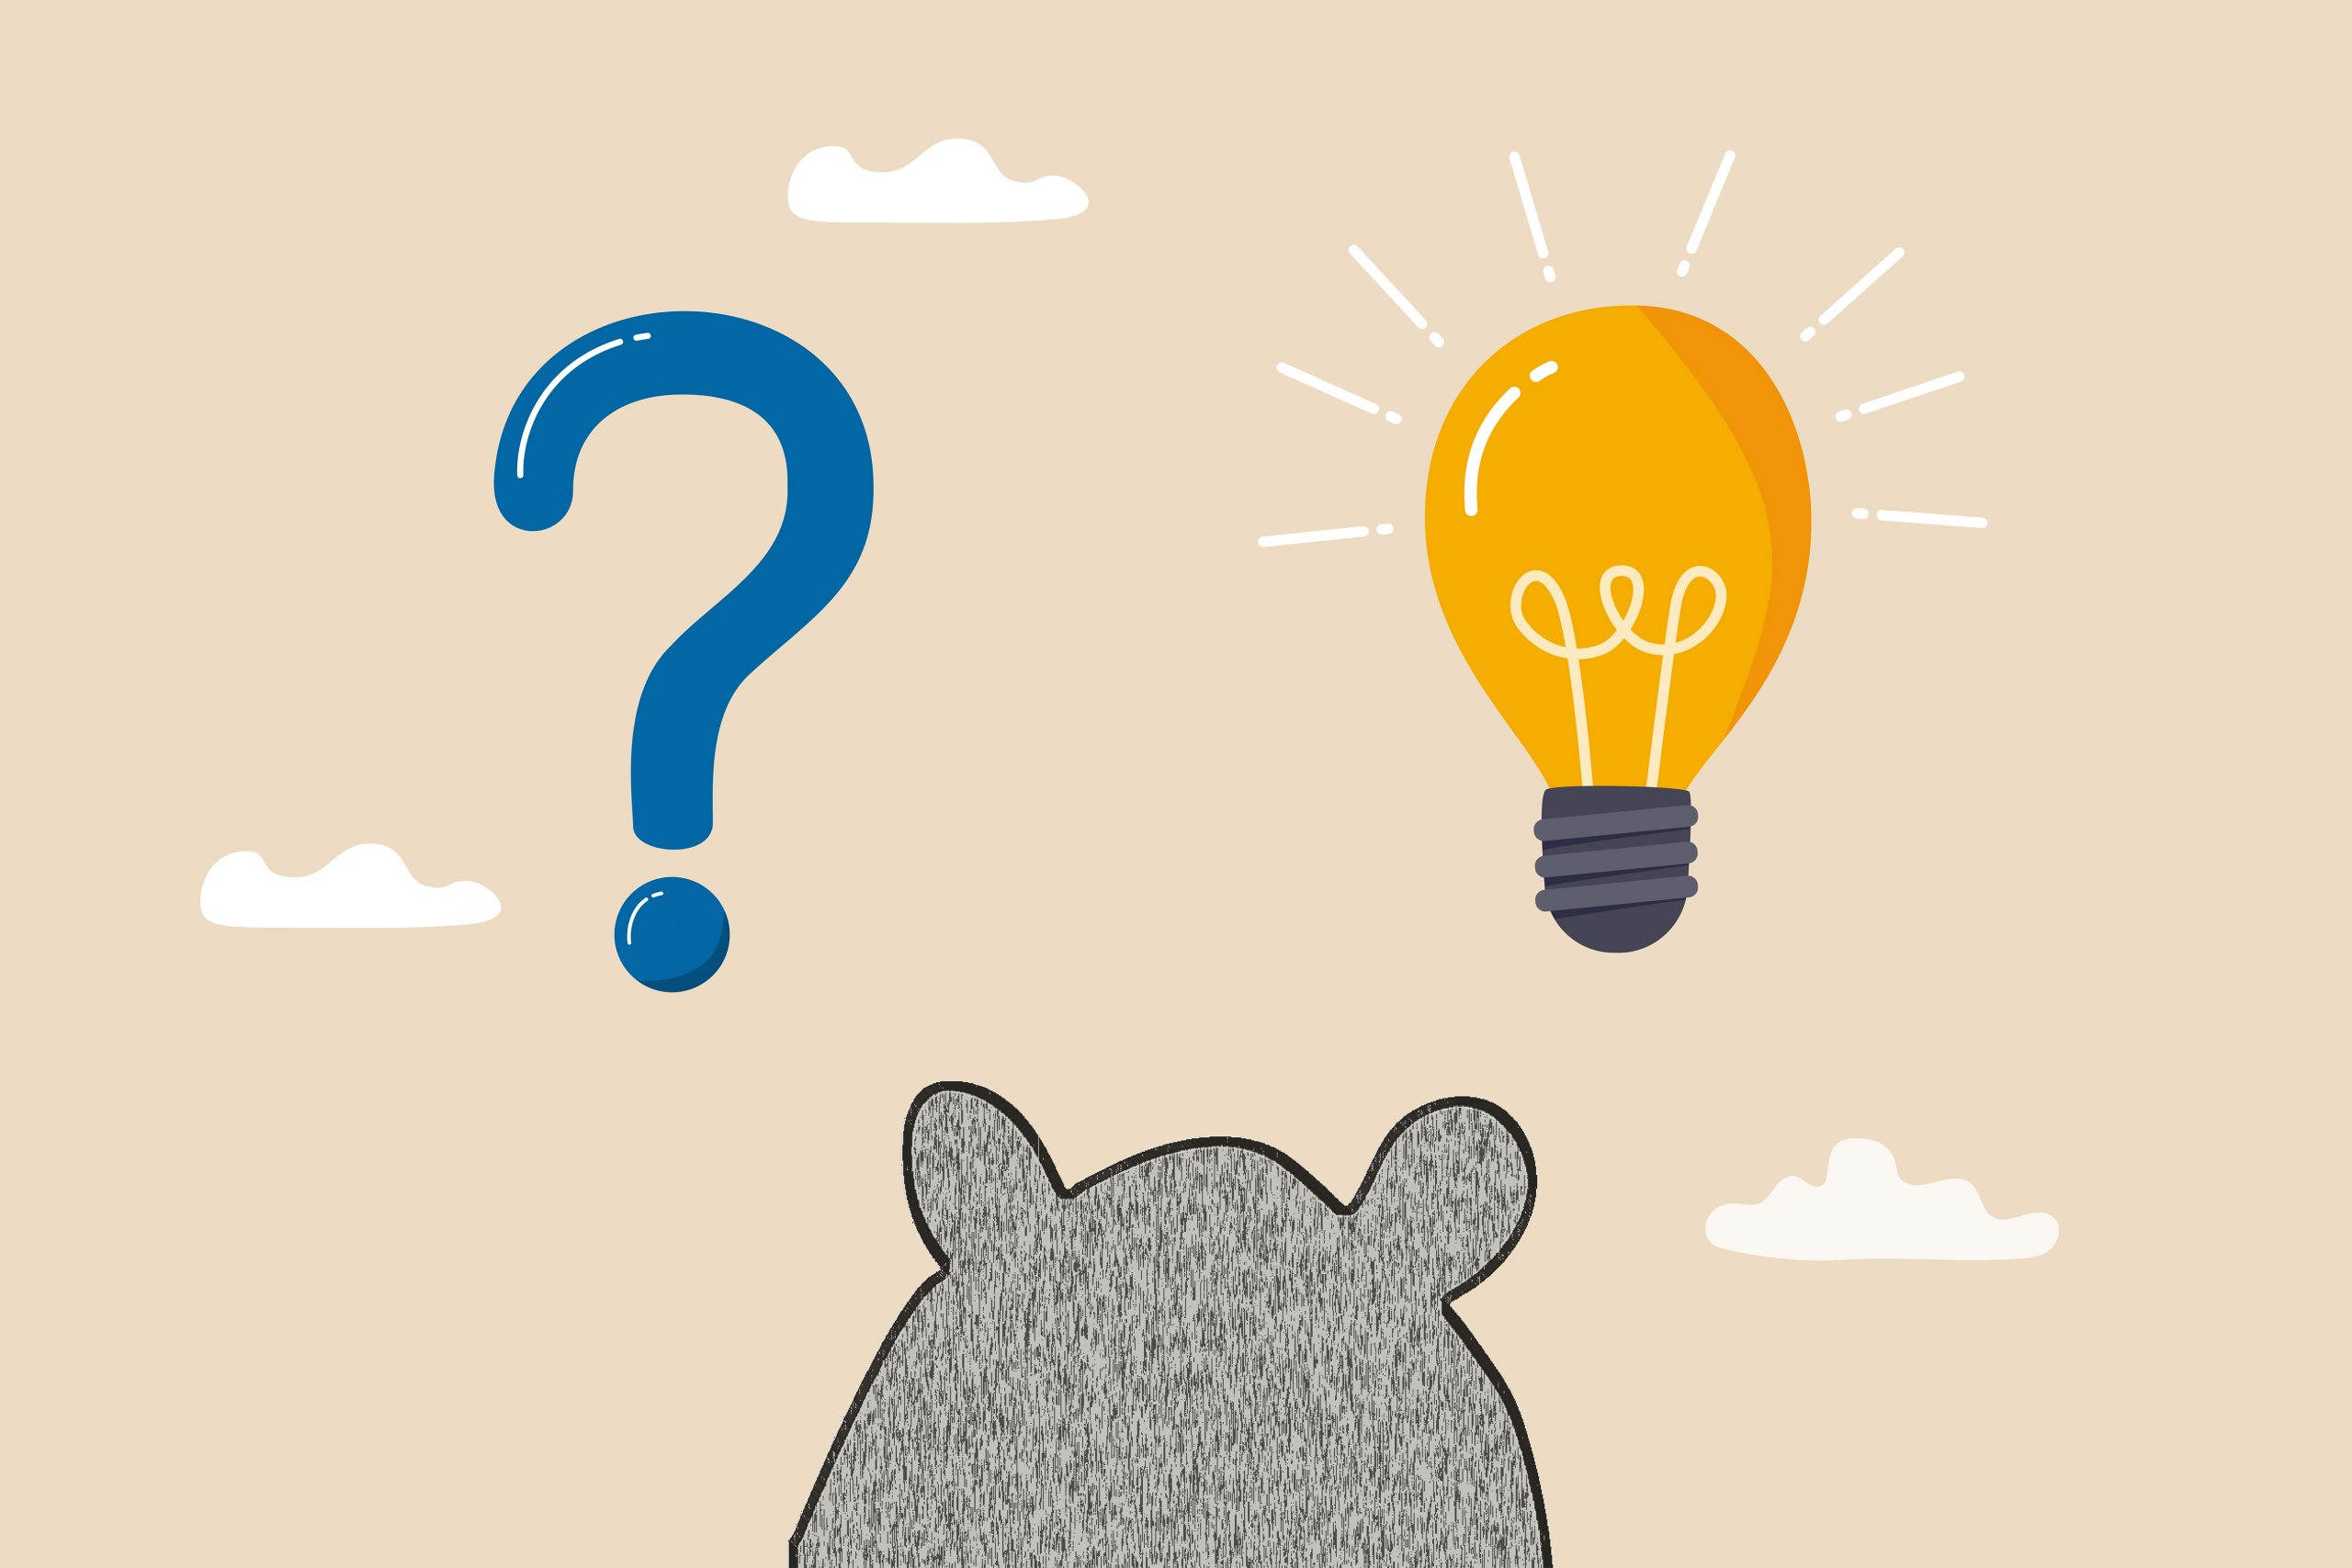 Illustration of mouse looking at a question mark and light bulb.